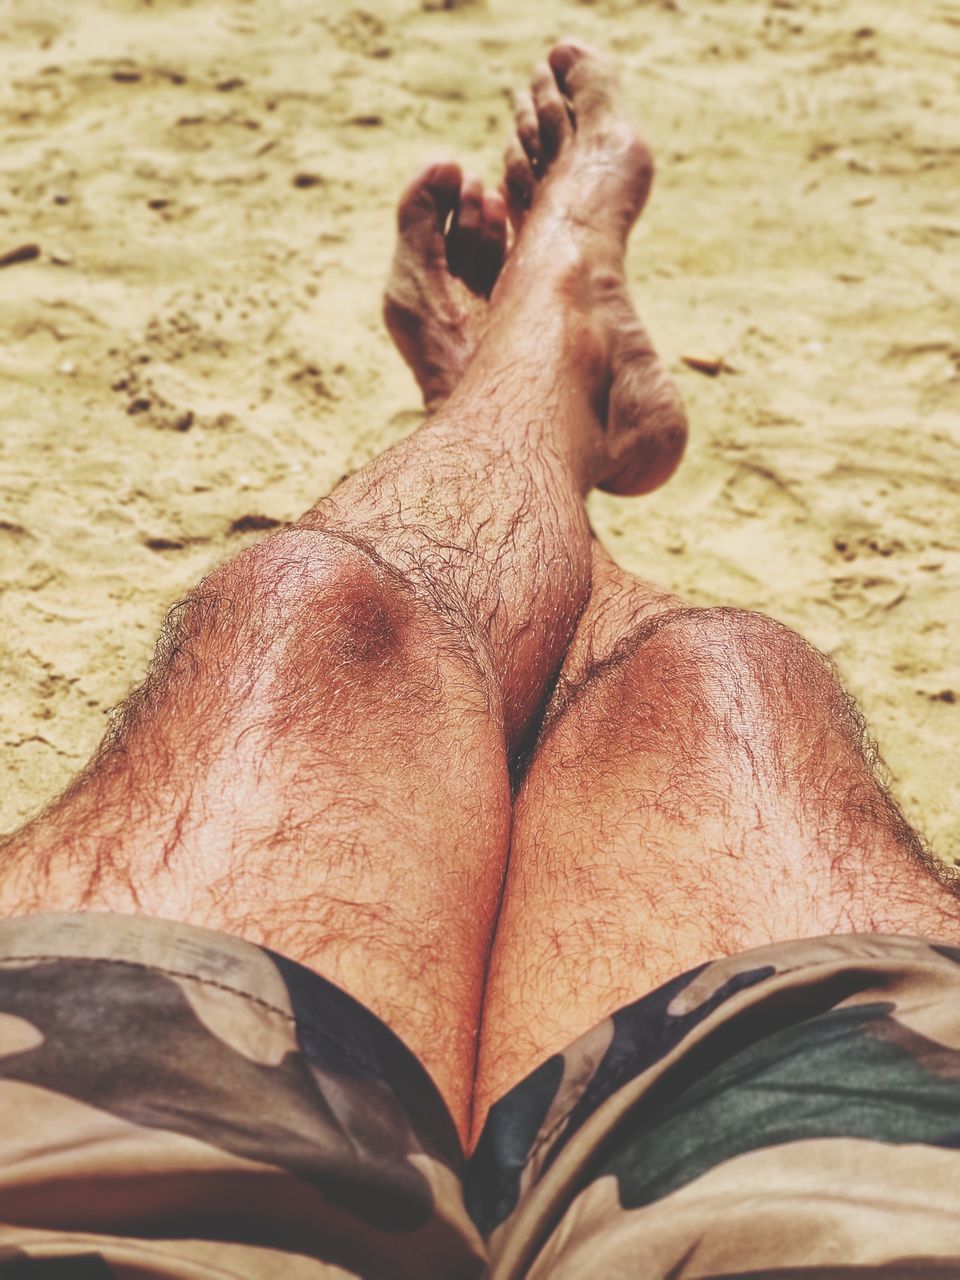 LOW SECTION OF MAN LYING DOWN ON SAND